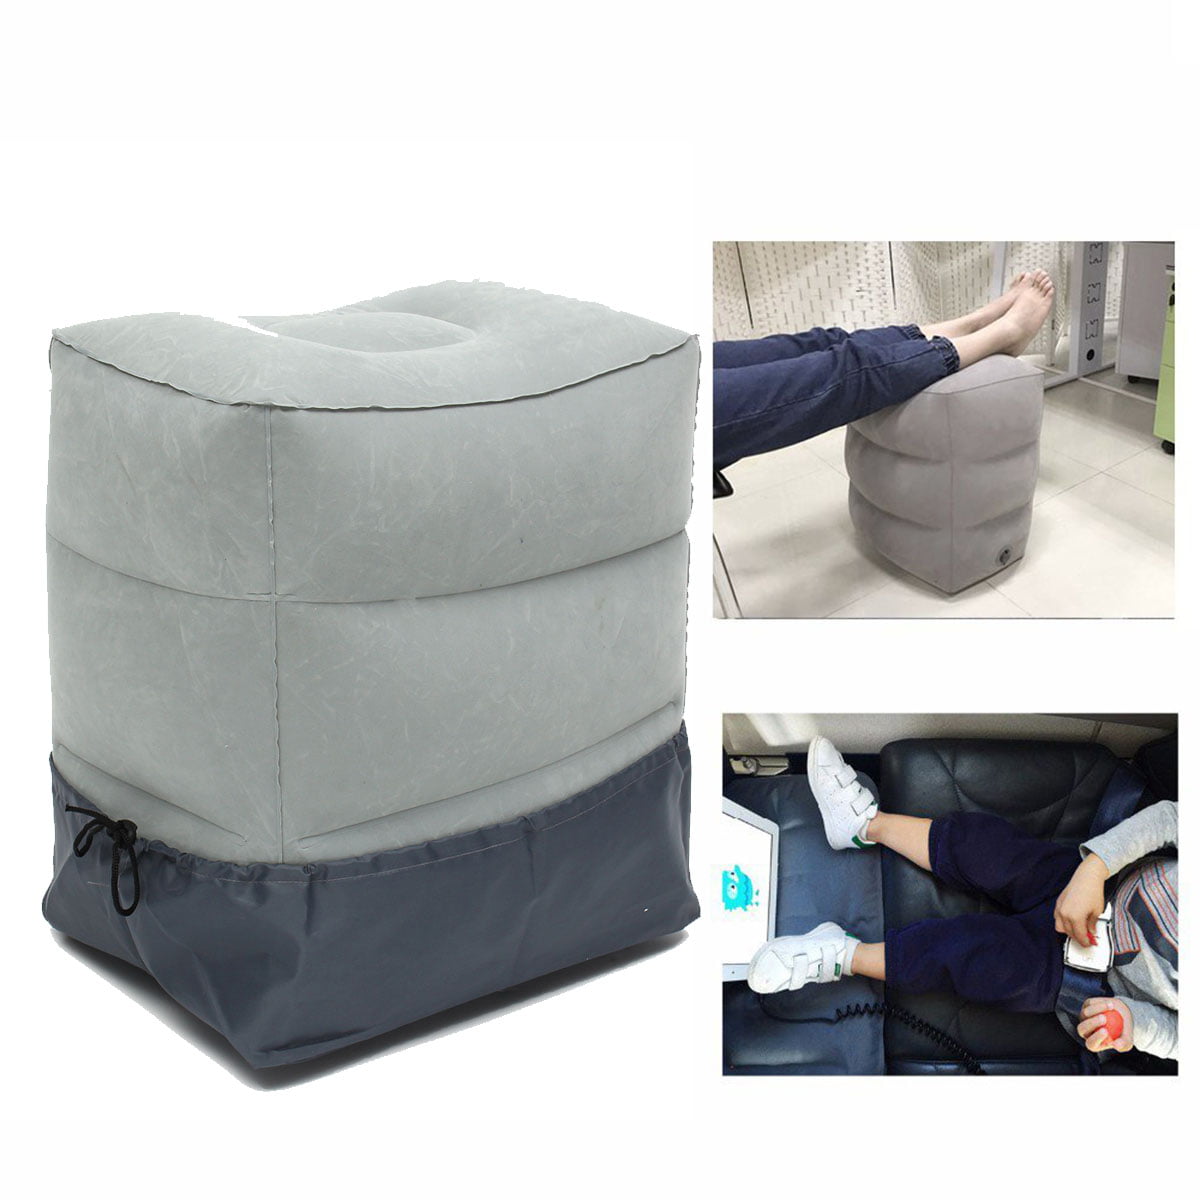 Cars Inflatable Travel Pillow Leg Rest,Kids Airplane Pillow Bed-3 Layer Adjustable Height Travel Foot Rest Cushion for Airplanes Dark Blue -1Pack Home & Office Trains Airplane Footrest 